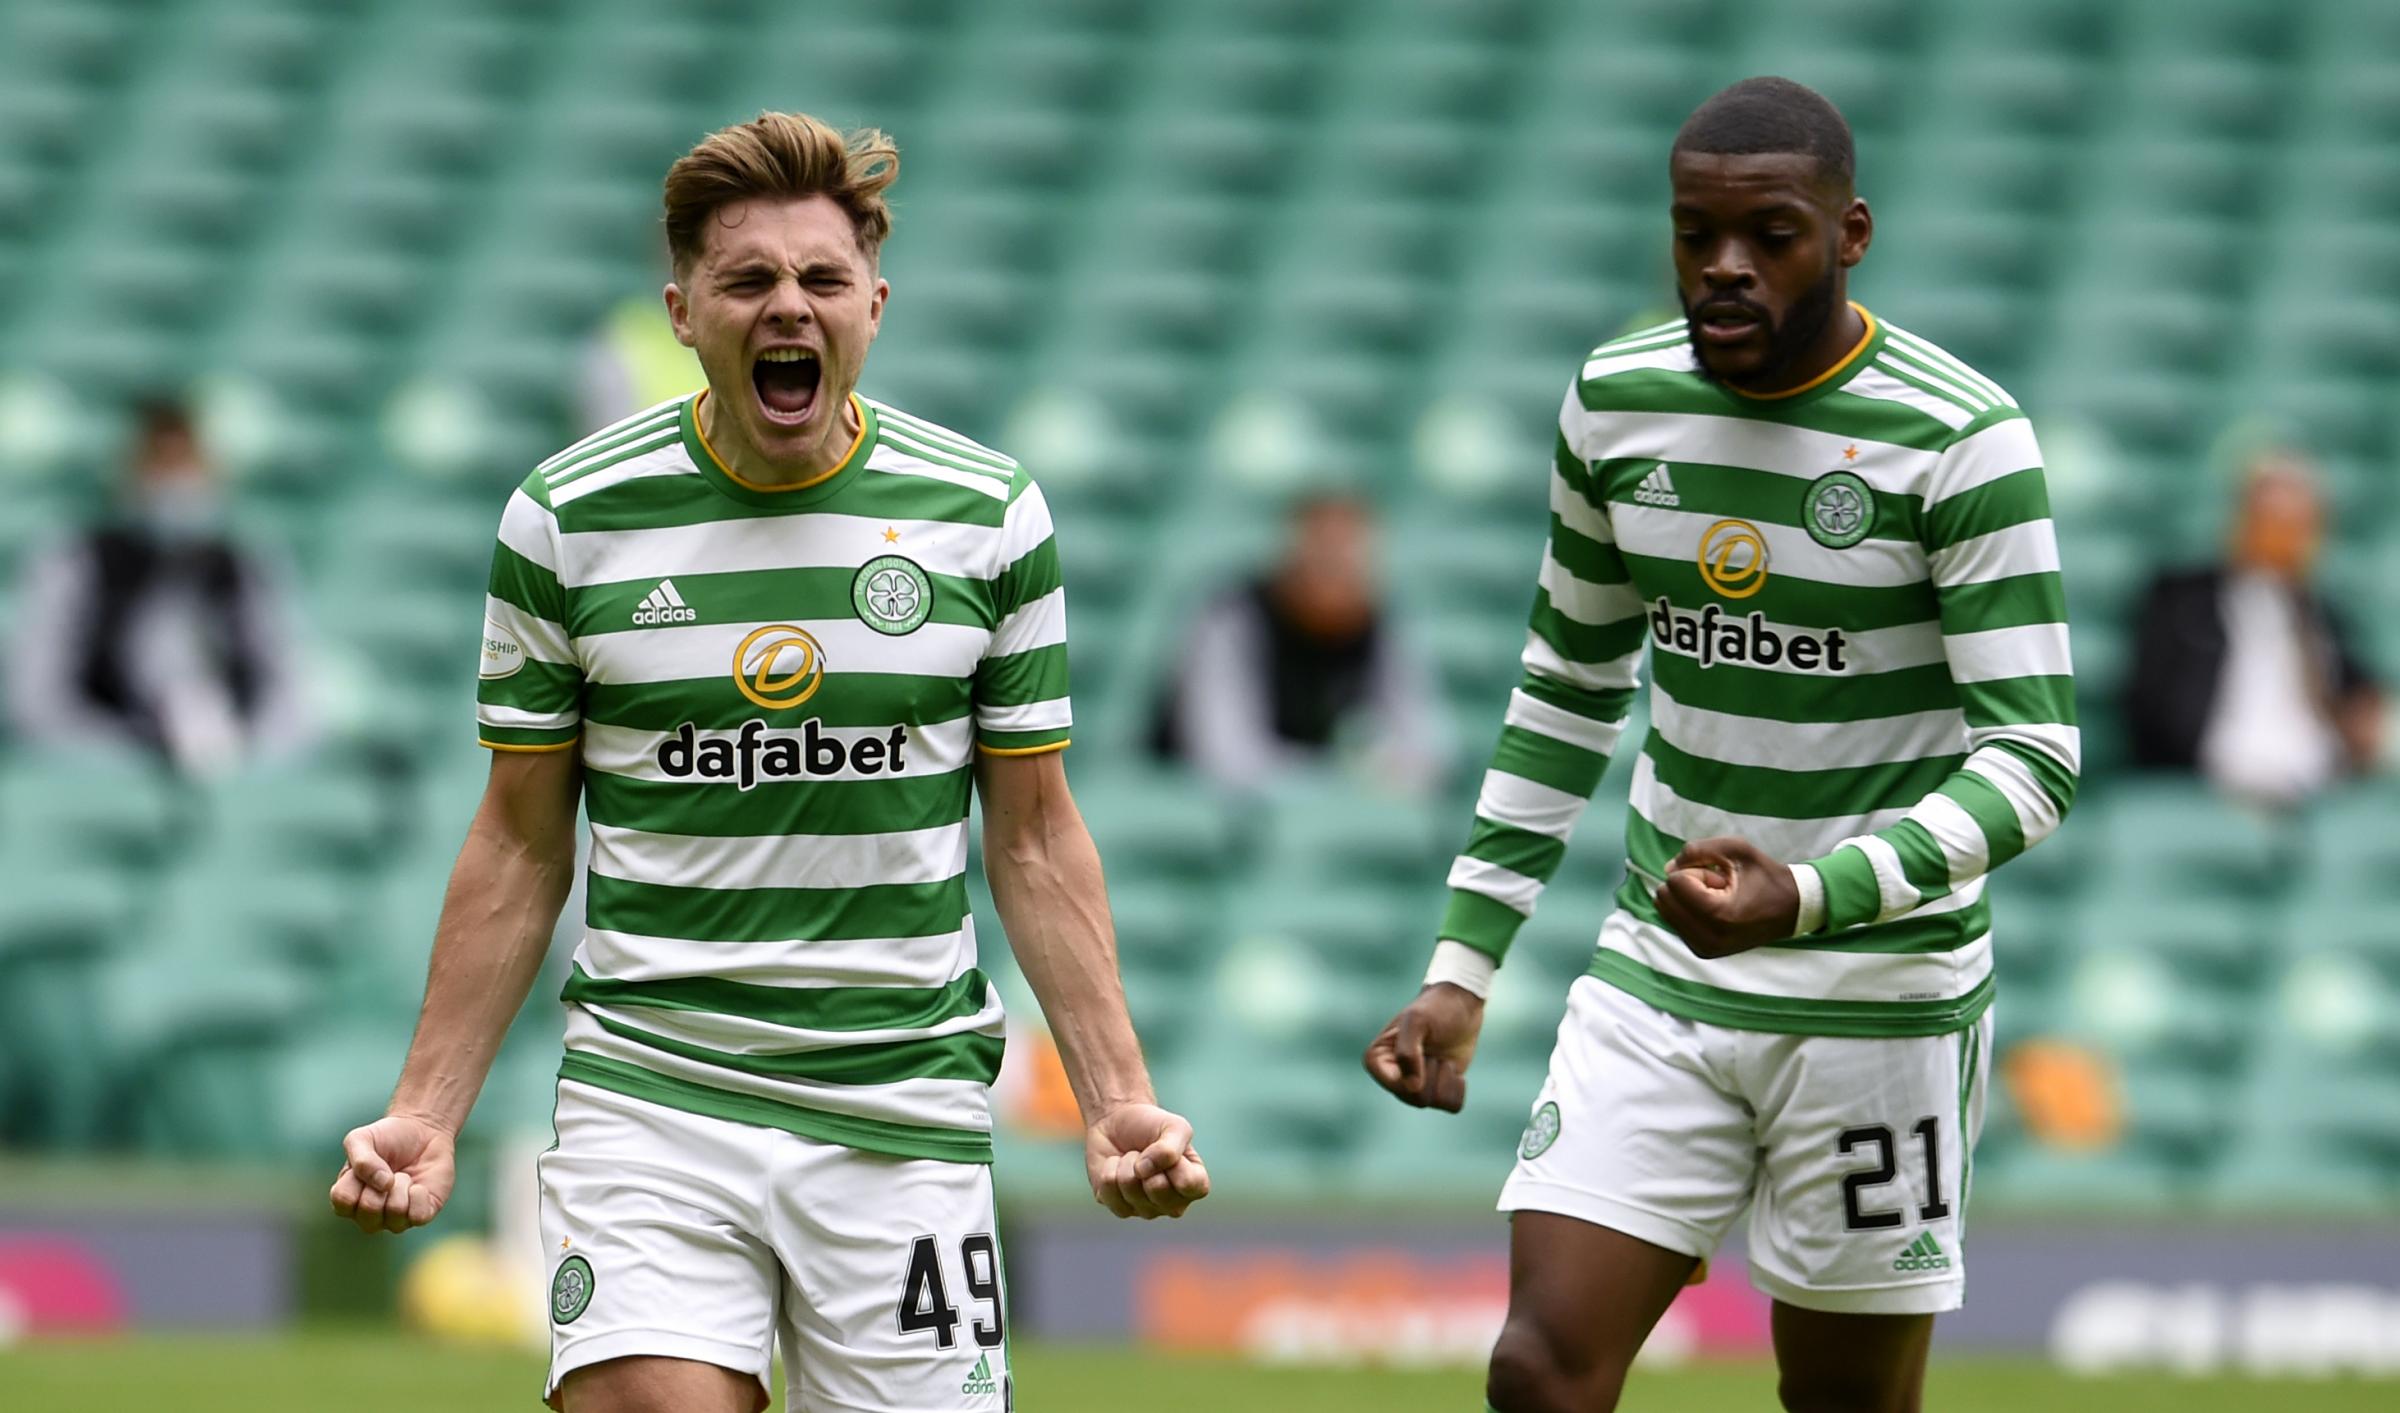 Celtic 3 Motherwell 0: Three things we learned as Neil Lennon's side get back to winning ways